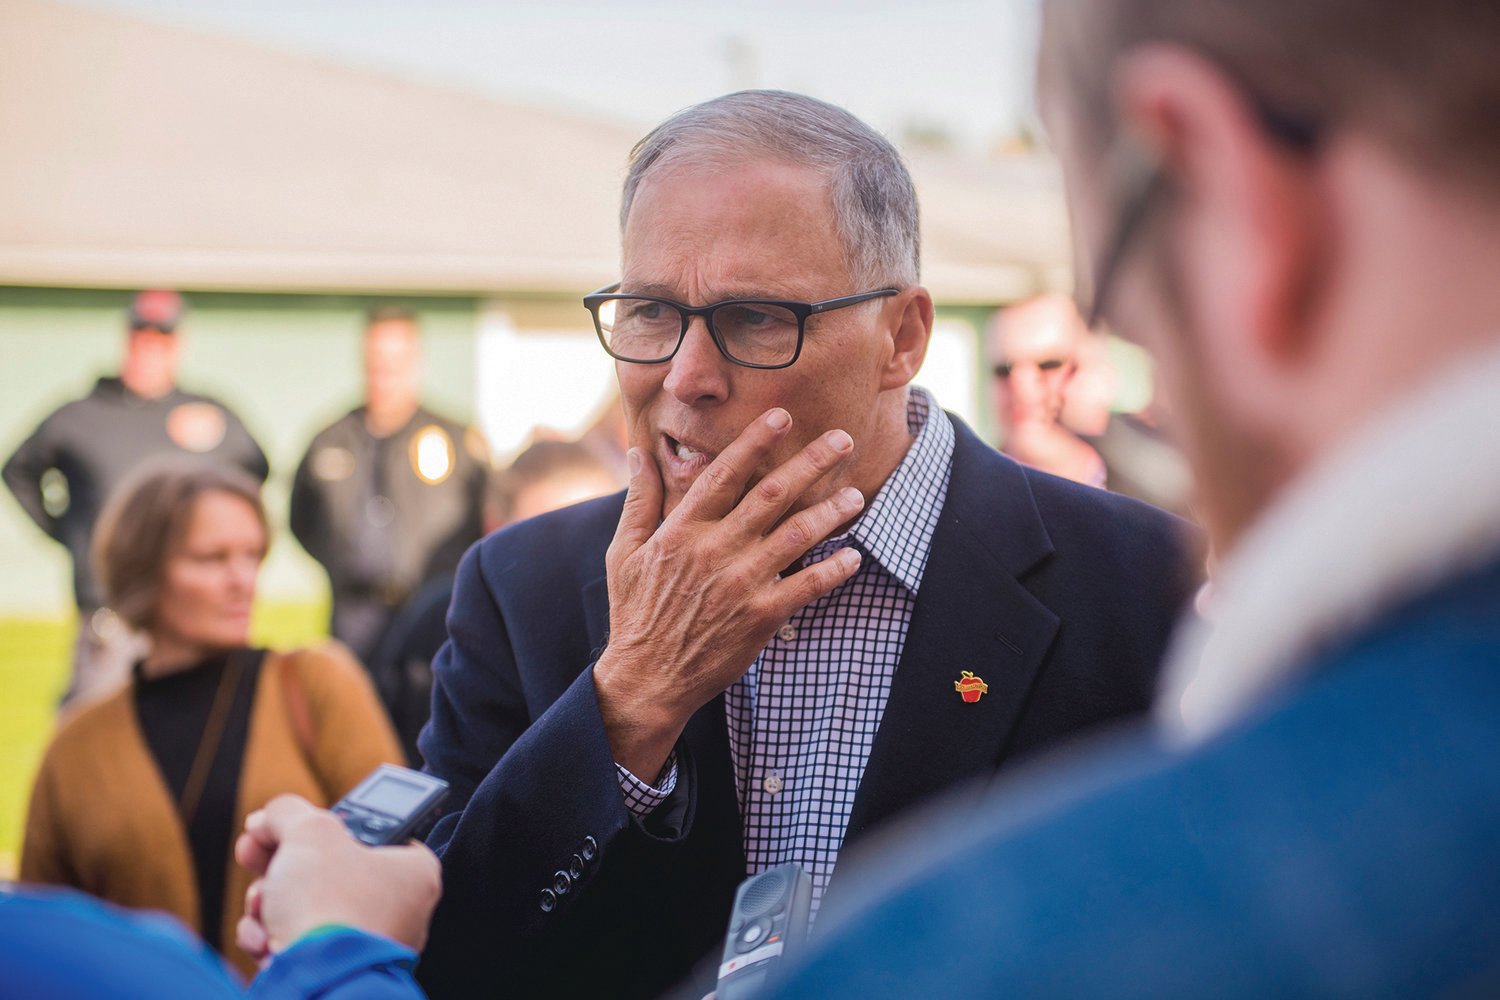 Governor Jay Inslee talks during a press conference at the Southwest Washington Fairgrounds in Chehalis in this file photo.